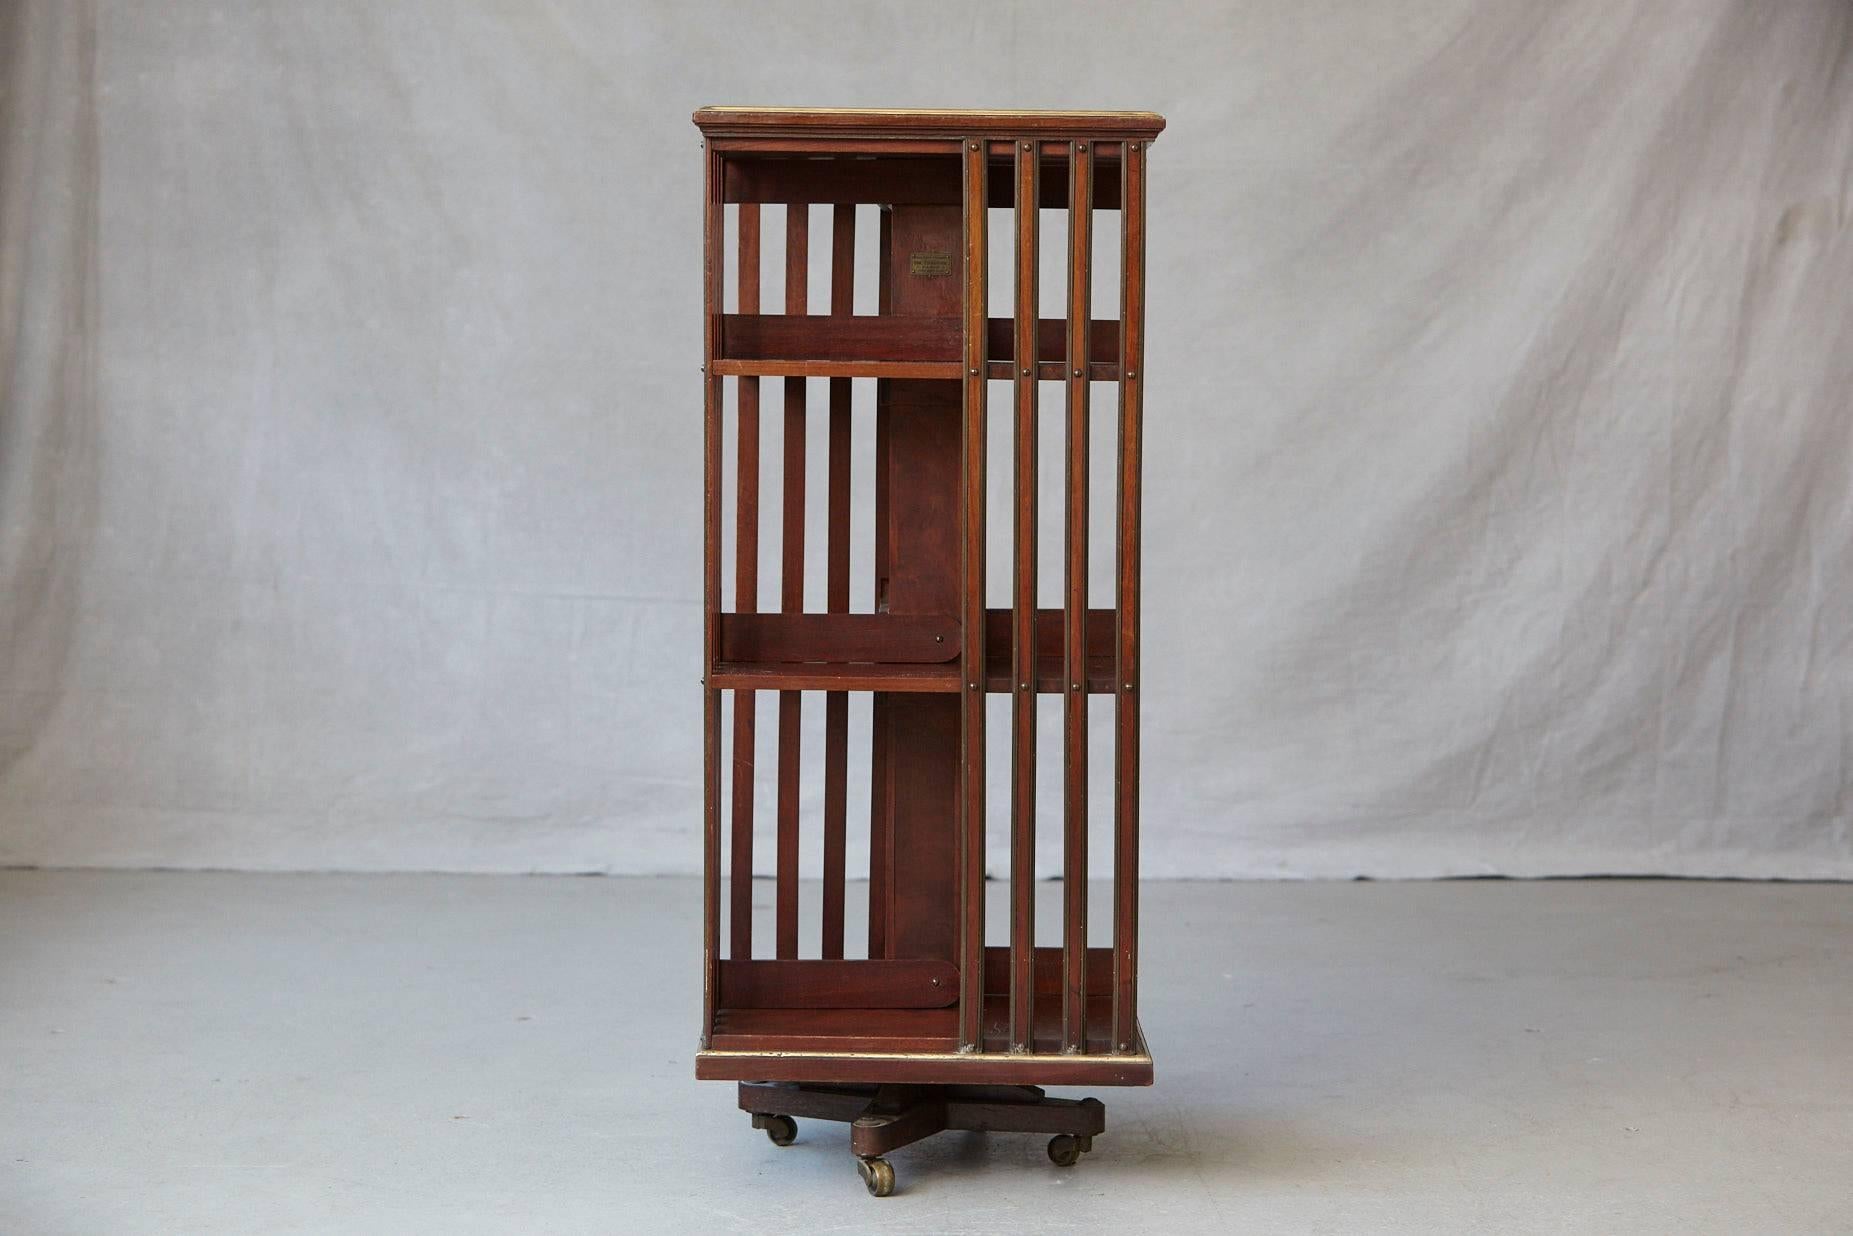 Antique French revolving mahogany bookcase with beautiful brass details, brass trim around the top and bottom, aligned brass screws and raised on four brass casters. Two tiers having slated upright supports. Nice patinated brass.
Original brass